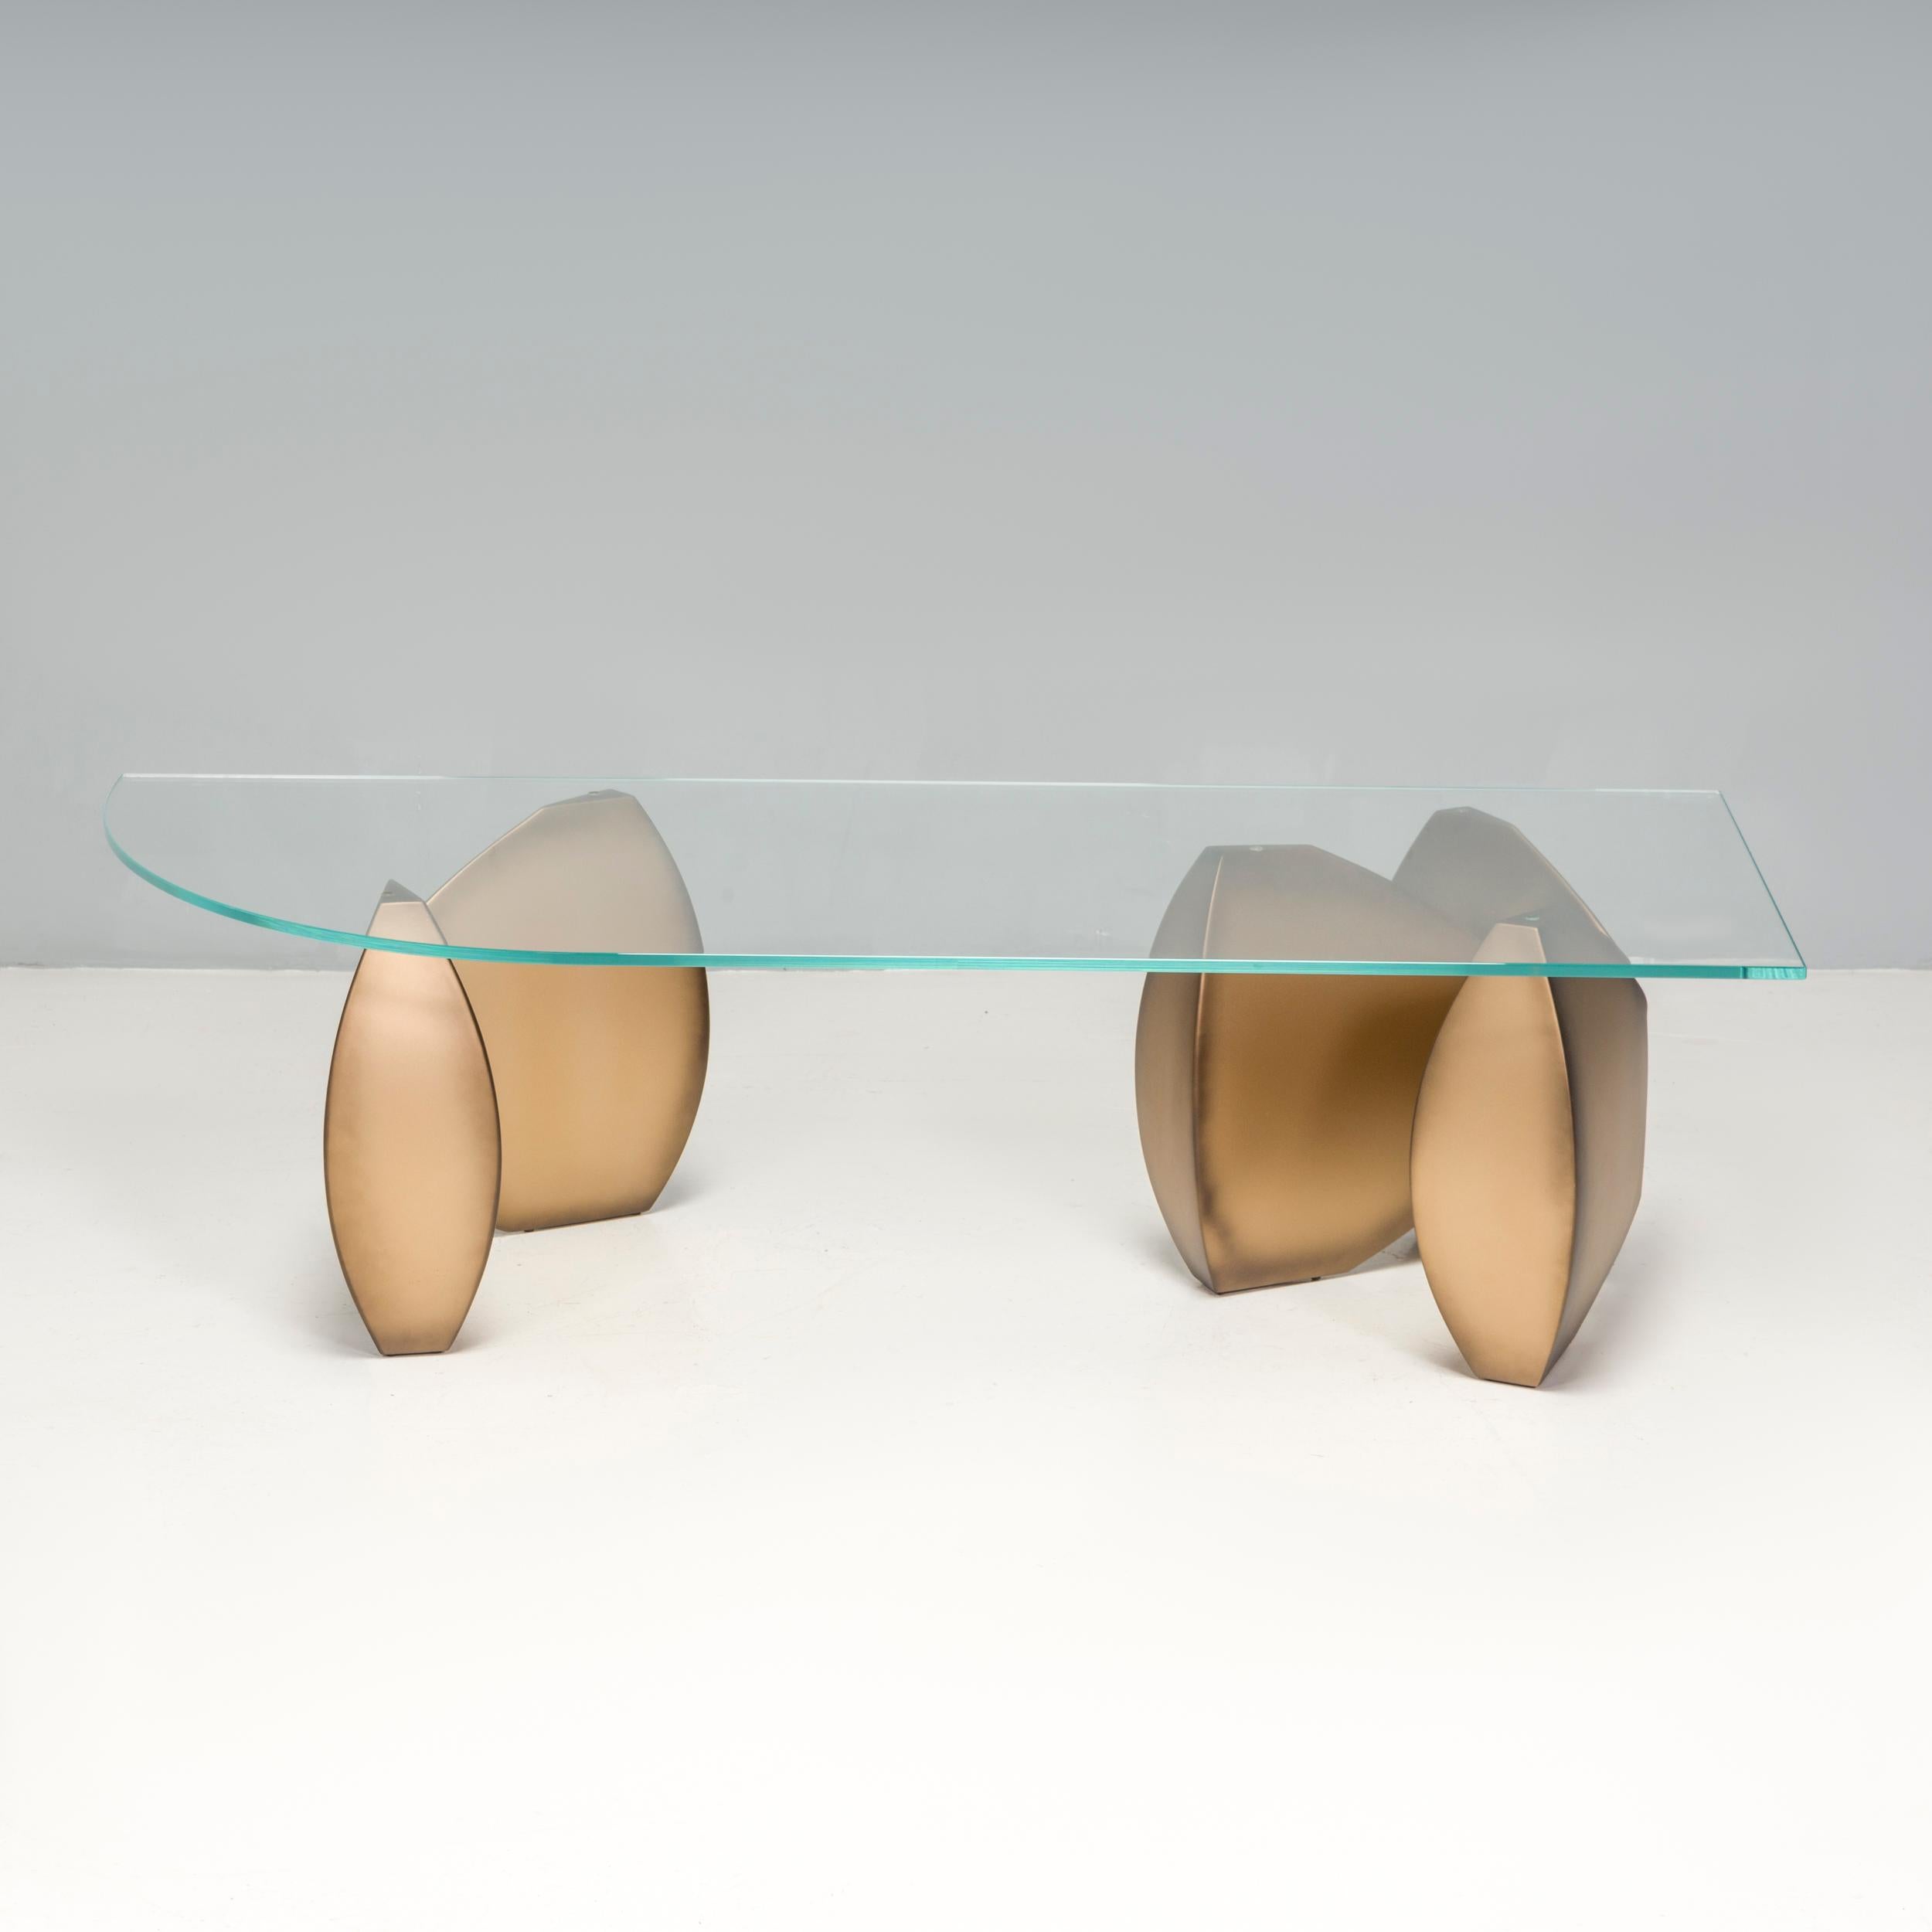 Evan Lewis furniture pieces are hand-crafted one at a time at the Evan Lewis atelier in Chicago, Illinois.  Founded in 1991 as a collection of sculptural furniture forms inspired by classical motifs, readapted as contemporary design. 

The Massi